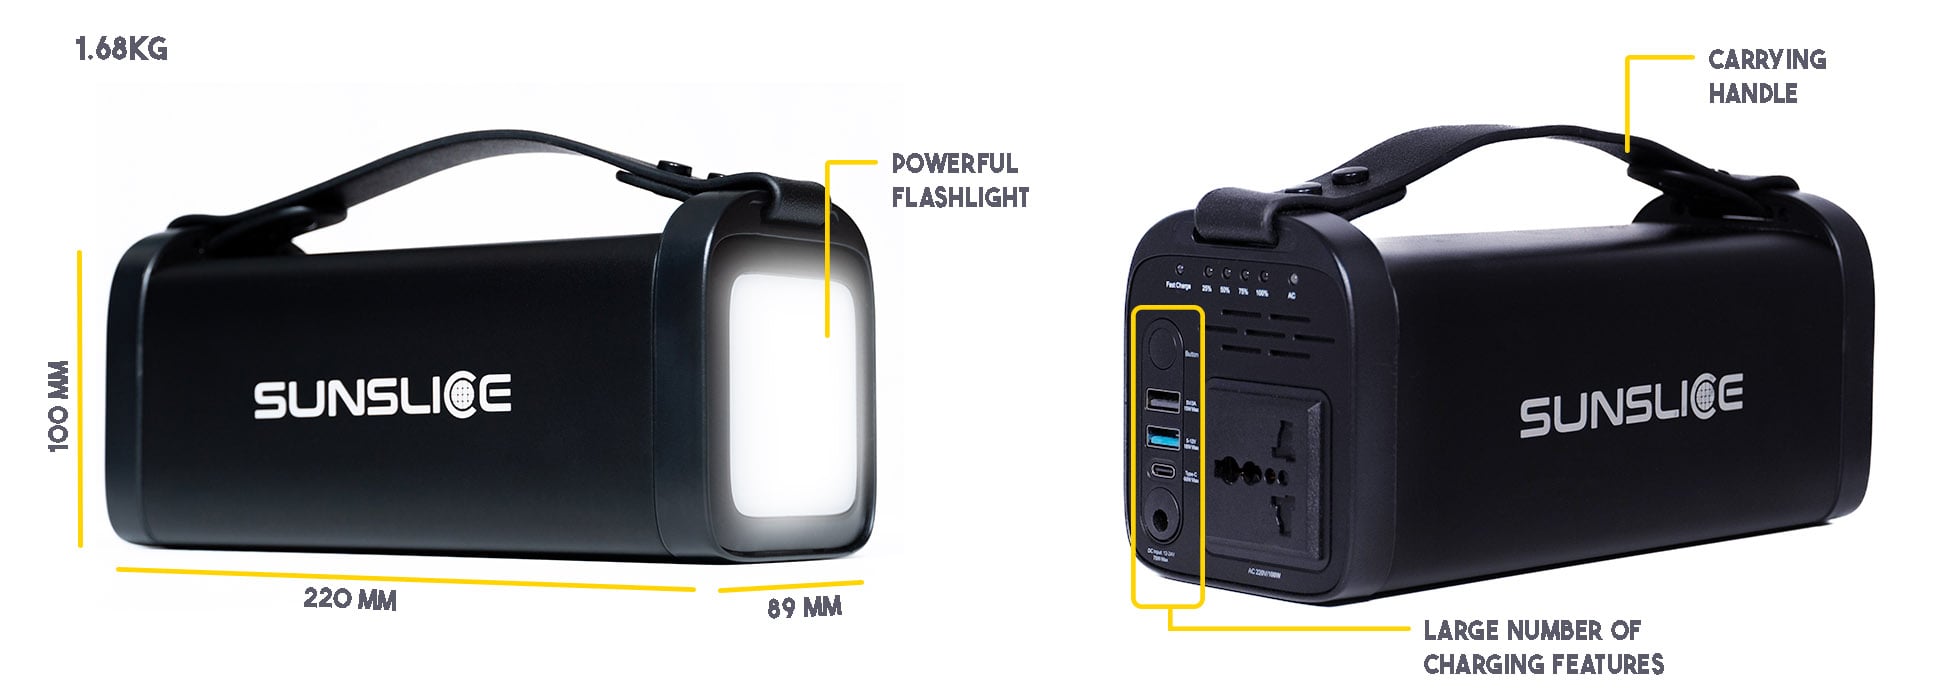 the generator gravity 144 with a powerful flashlight , a carrying handle. Size: 220mm, 89mm, 100mm